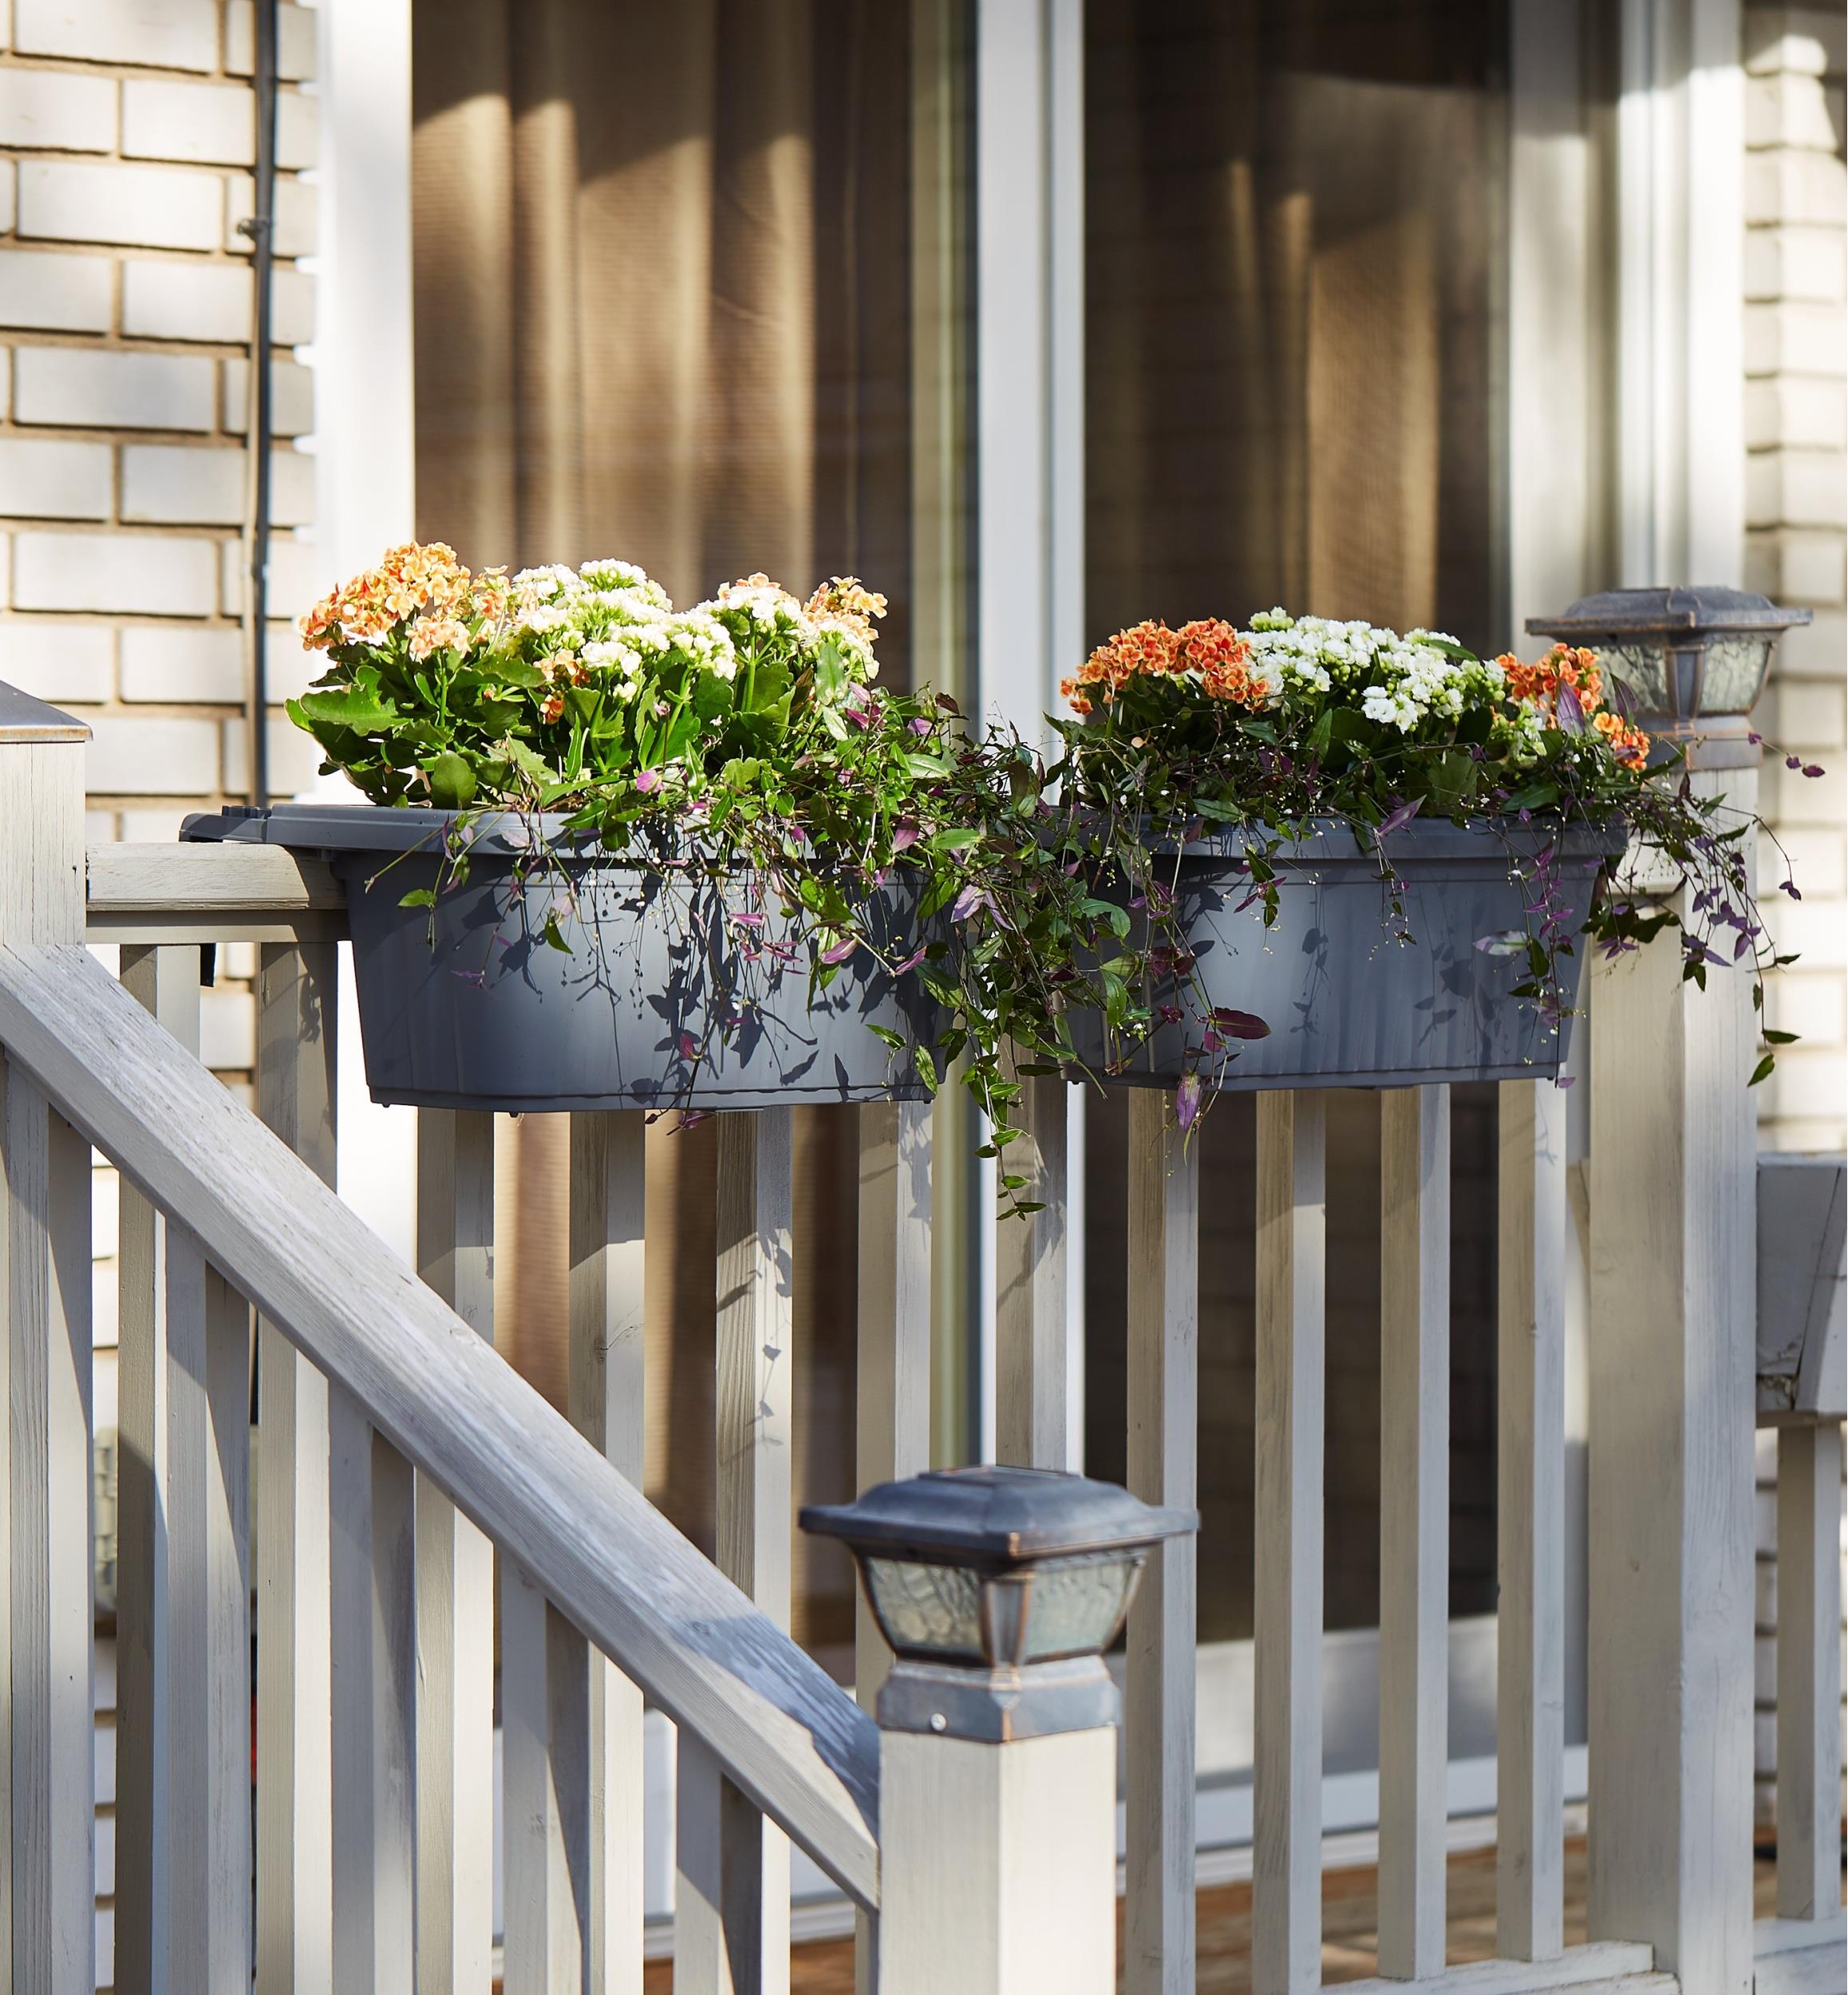 Fence & Railing Planters - Lee Valley Tools